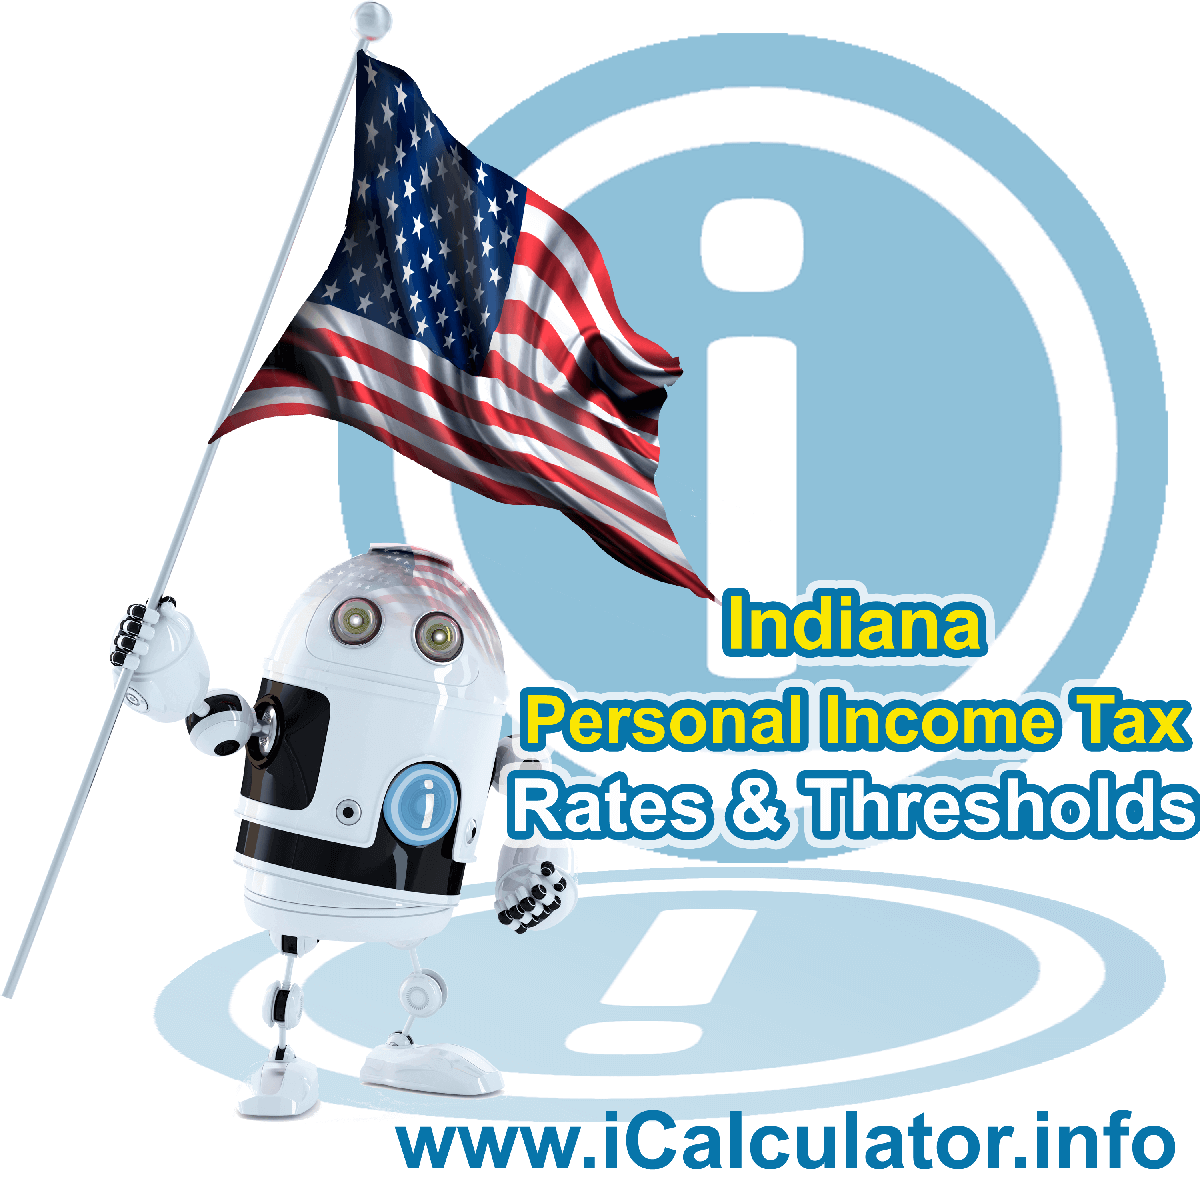 Indiana State Tax Tables 2023. This image displays details of the Indiana State Tax Tables for the 2023 tax return year which is provided in support of the 2023 US Tax Calculator